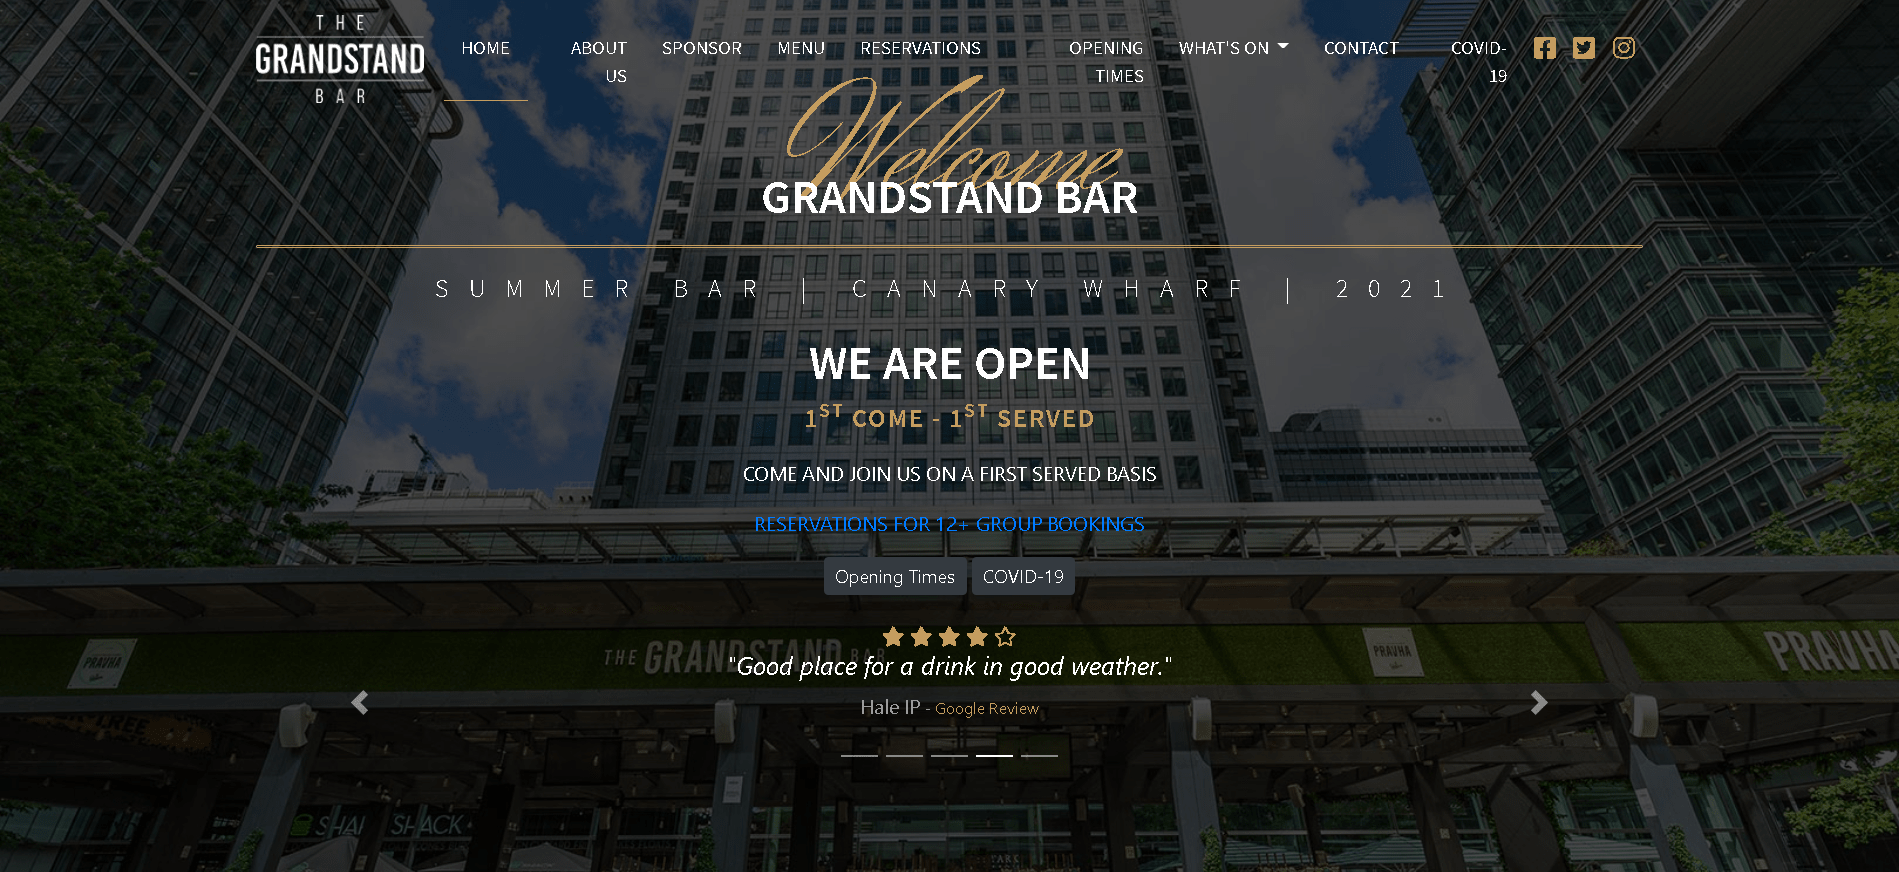 The Grandstand Bar